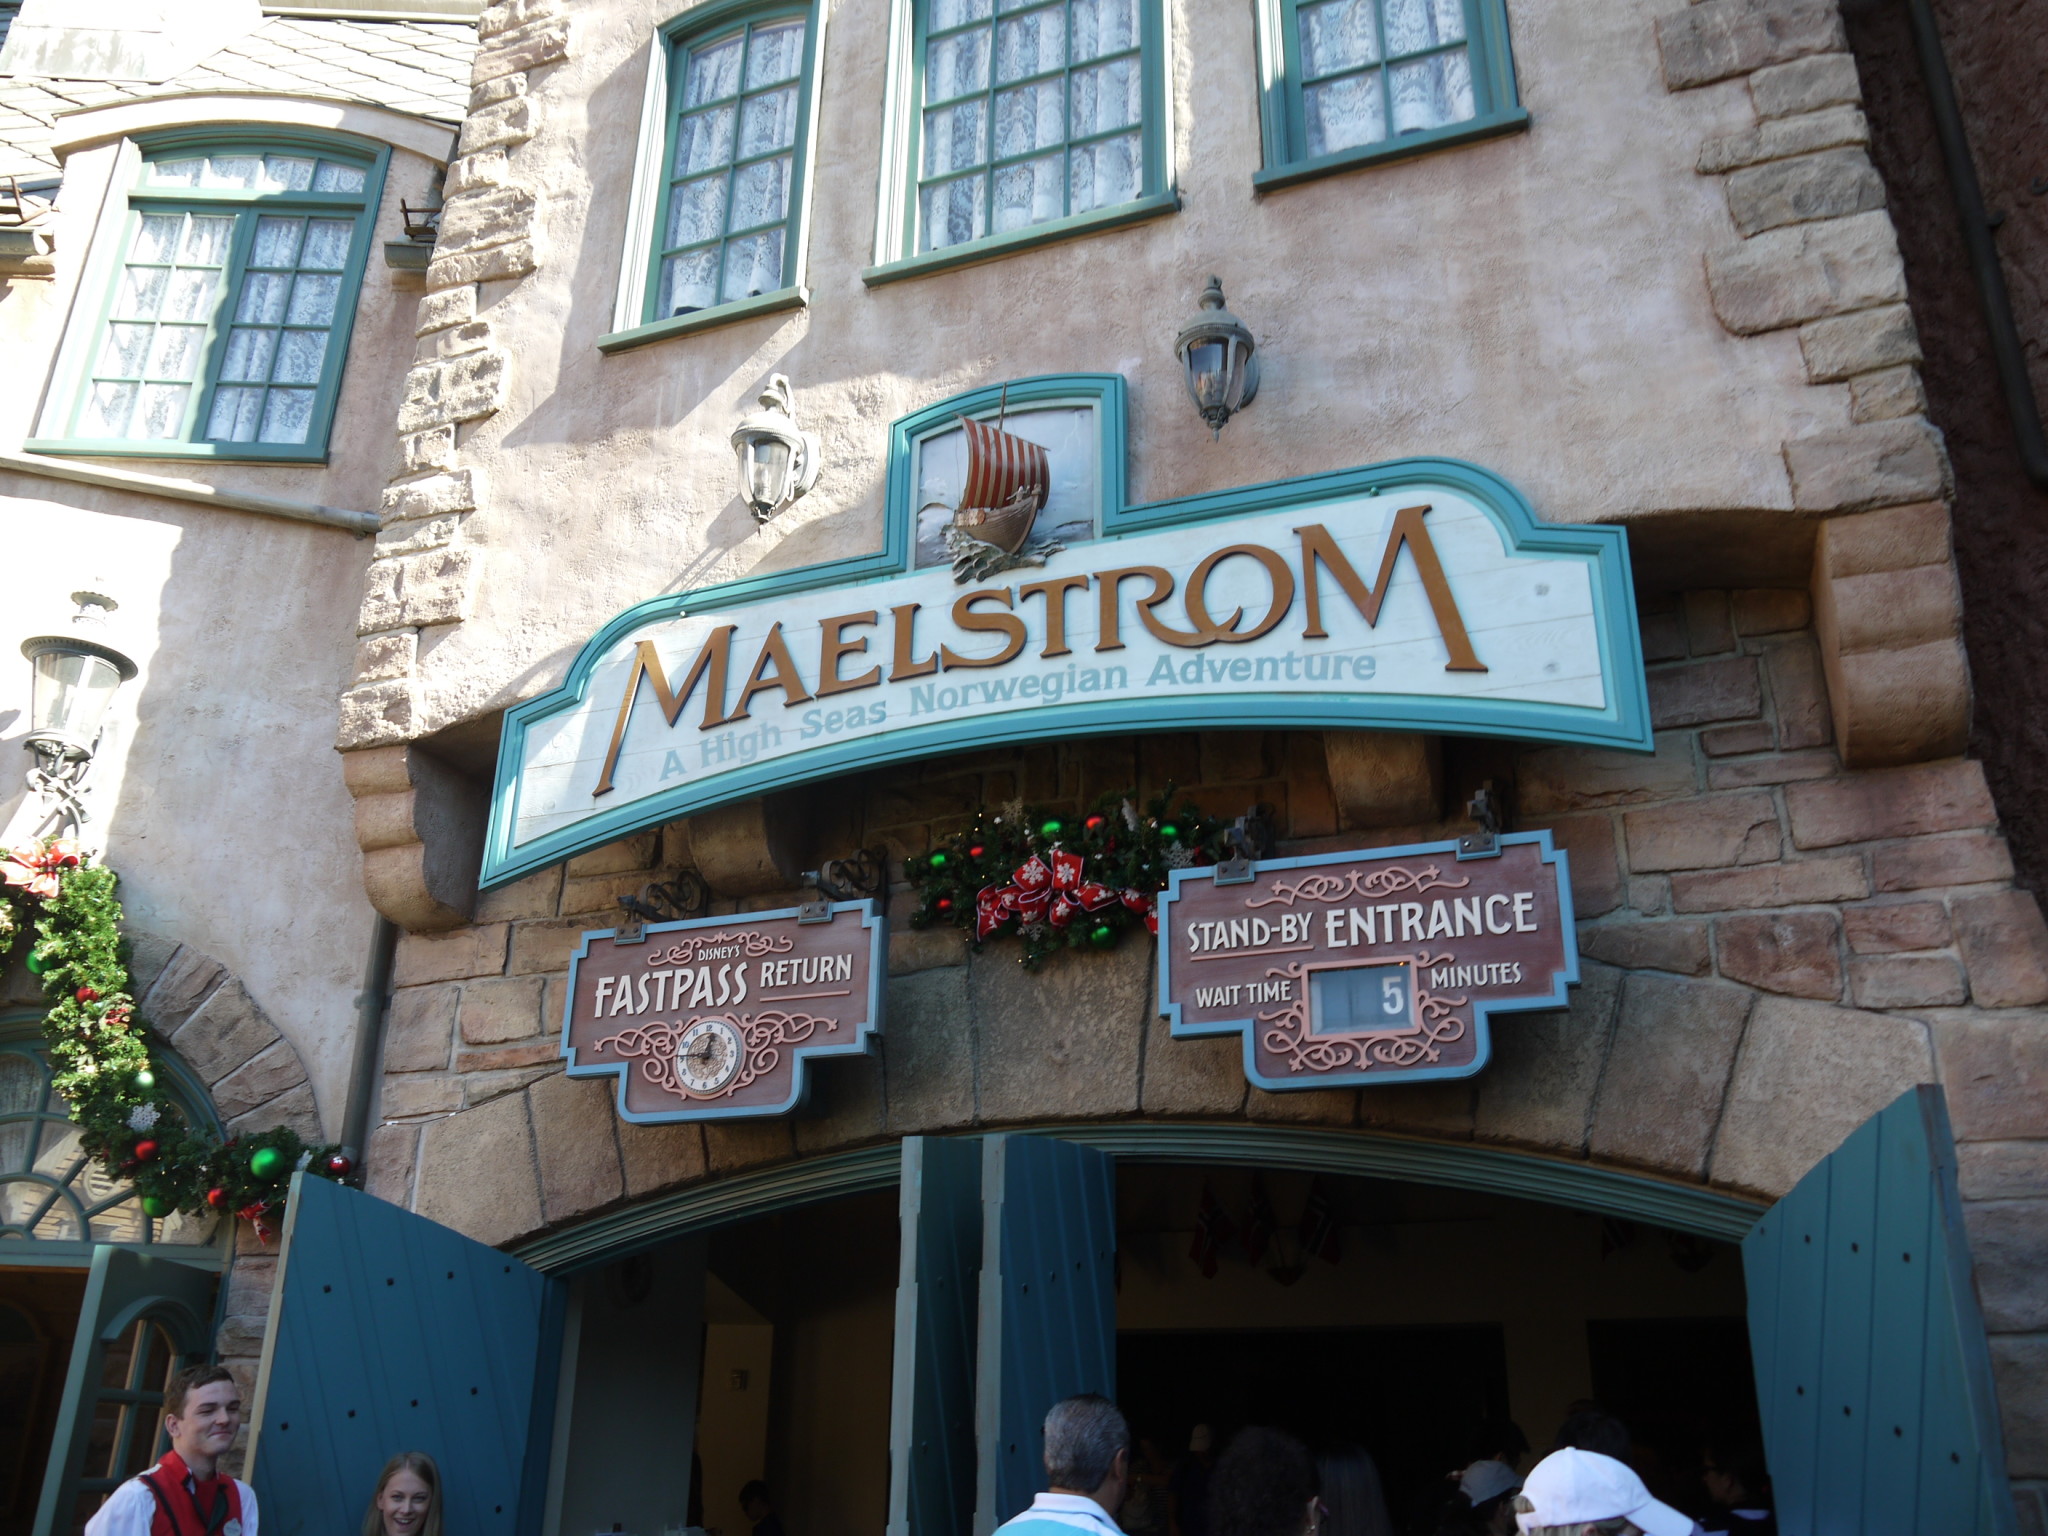 Is a Frozen ride replacing the Maelstrom?